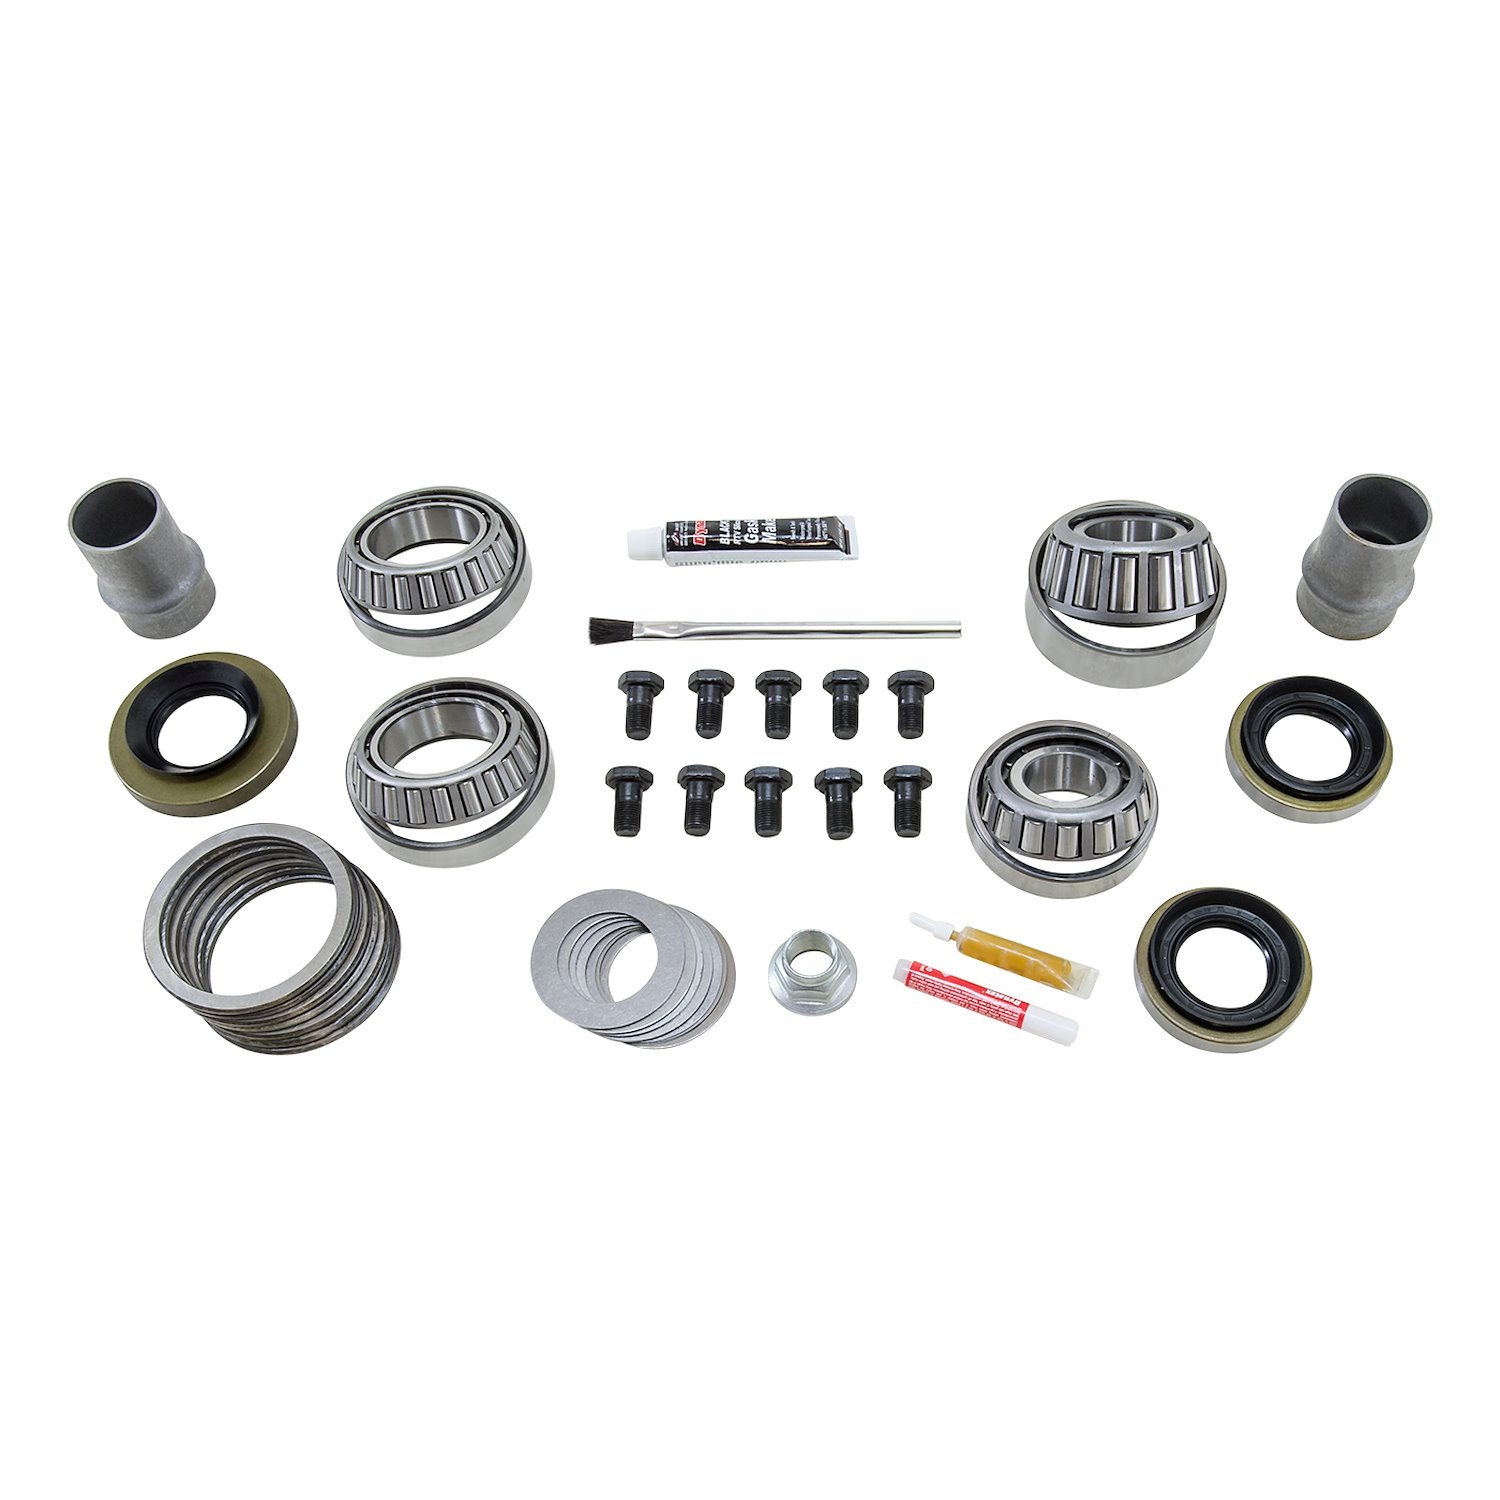 USA Standard 37107 Master Overhaul Kit, For Toyota 7.5 in. Ifs Differential, 4-Cyl Only